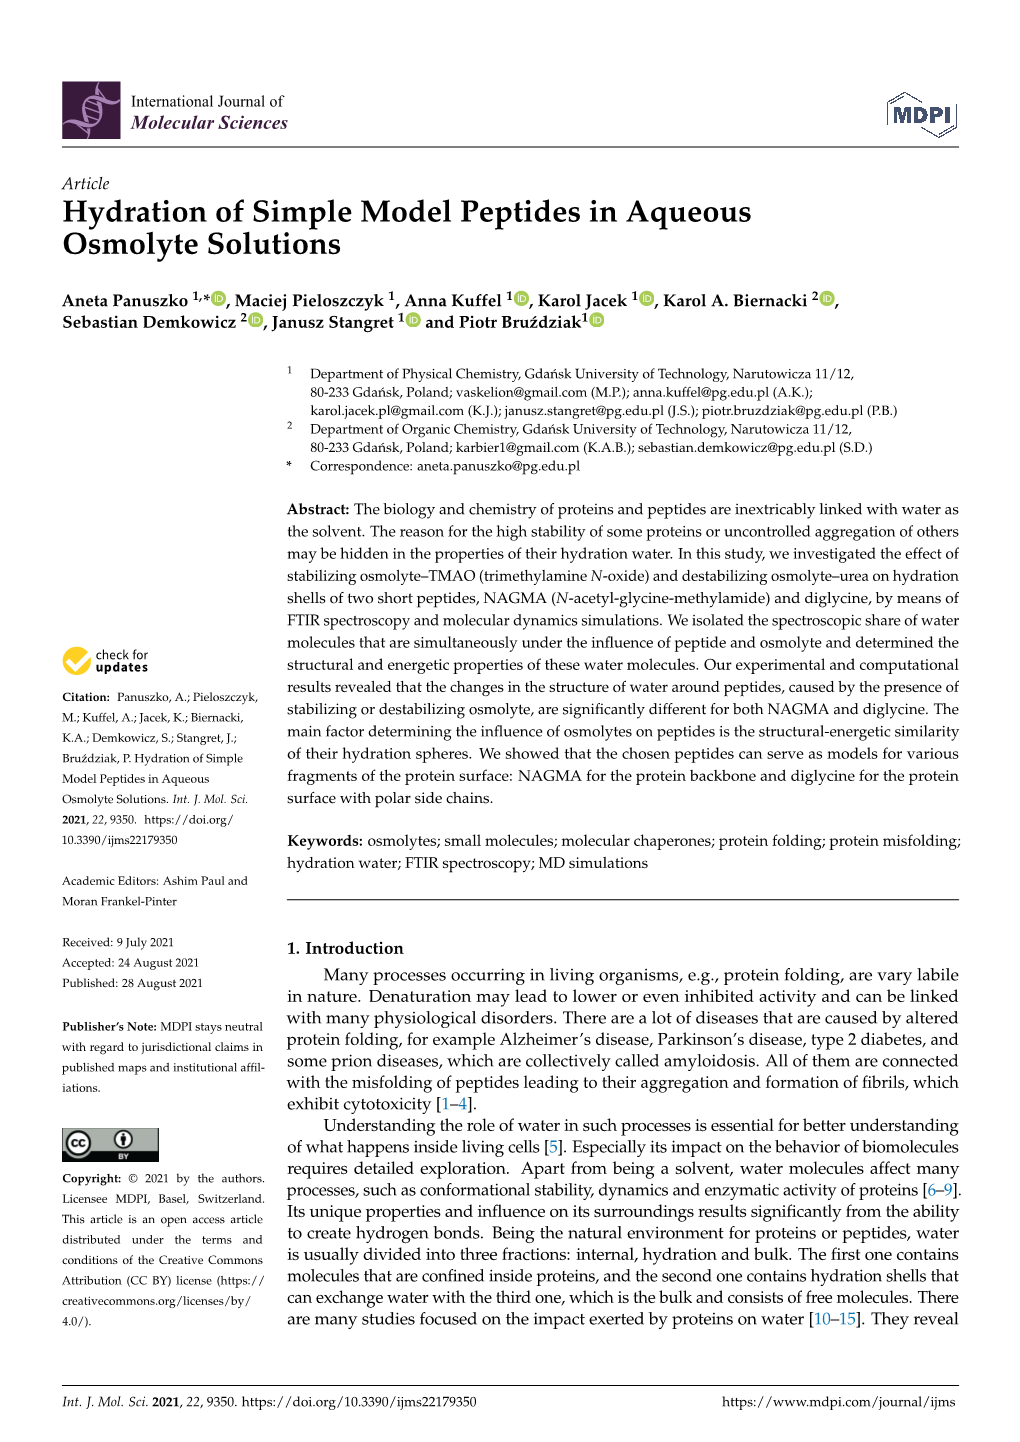 Hydration of Simple Model Peptides in Aqueousosmolyte Solutions